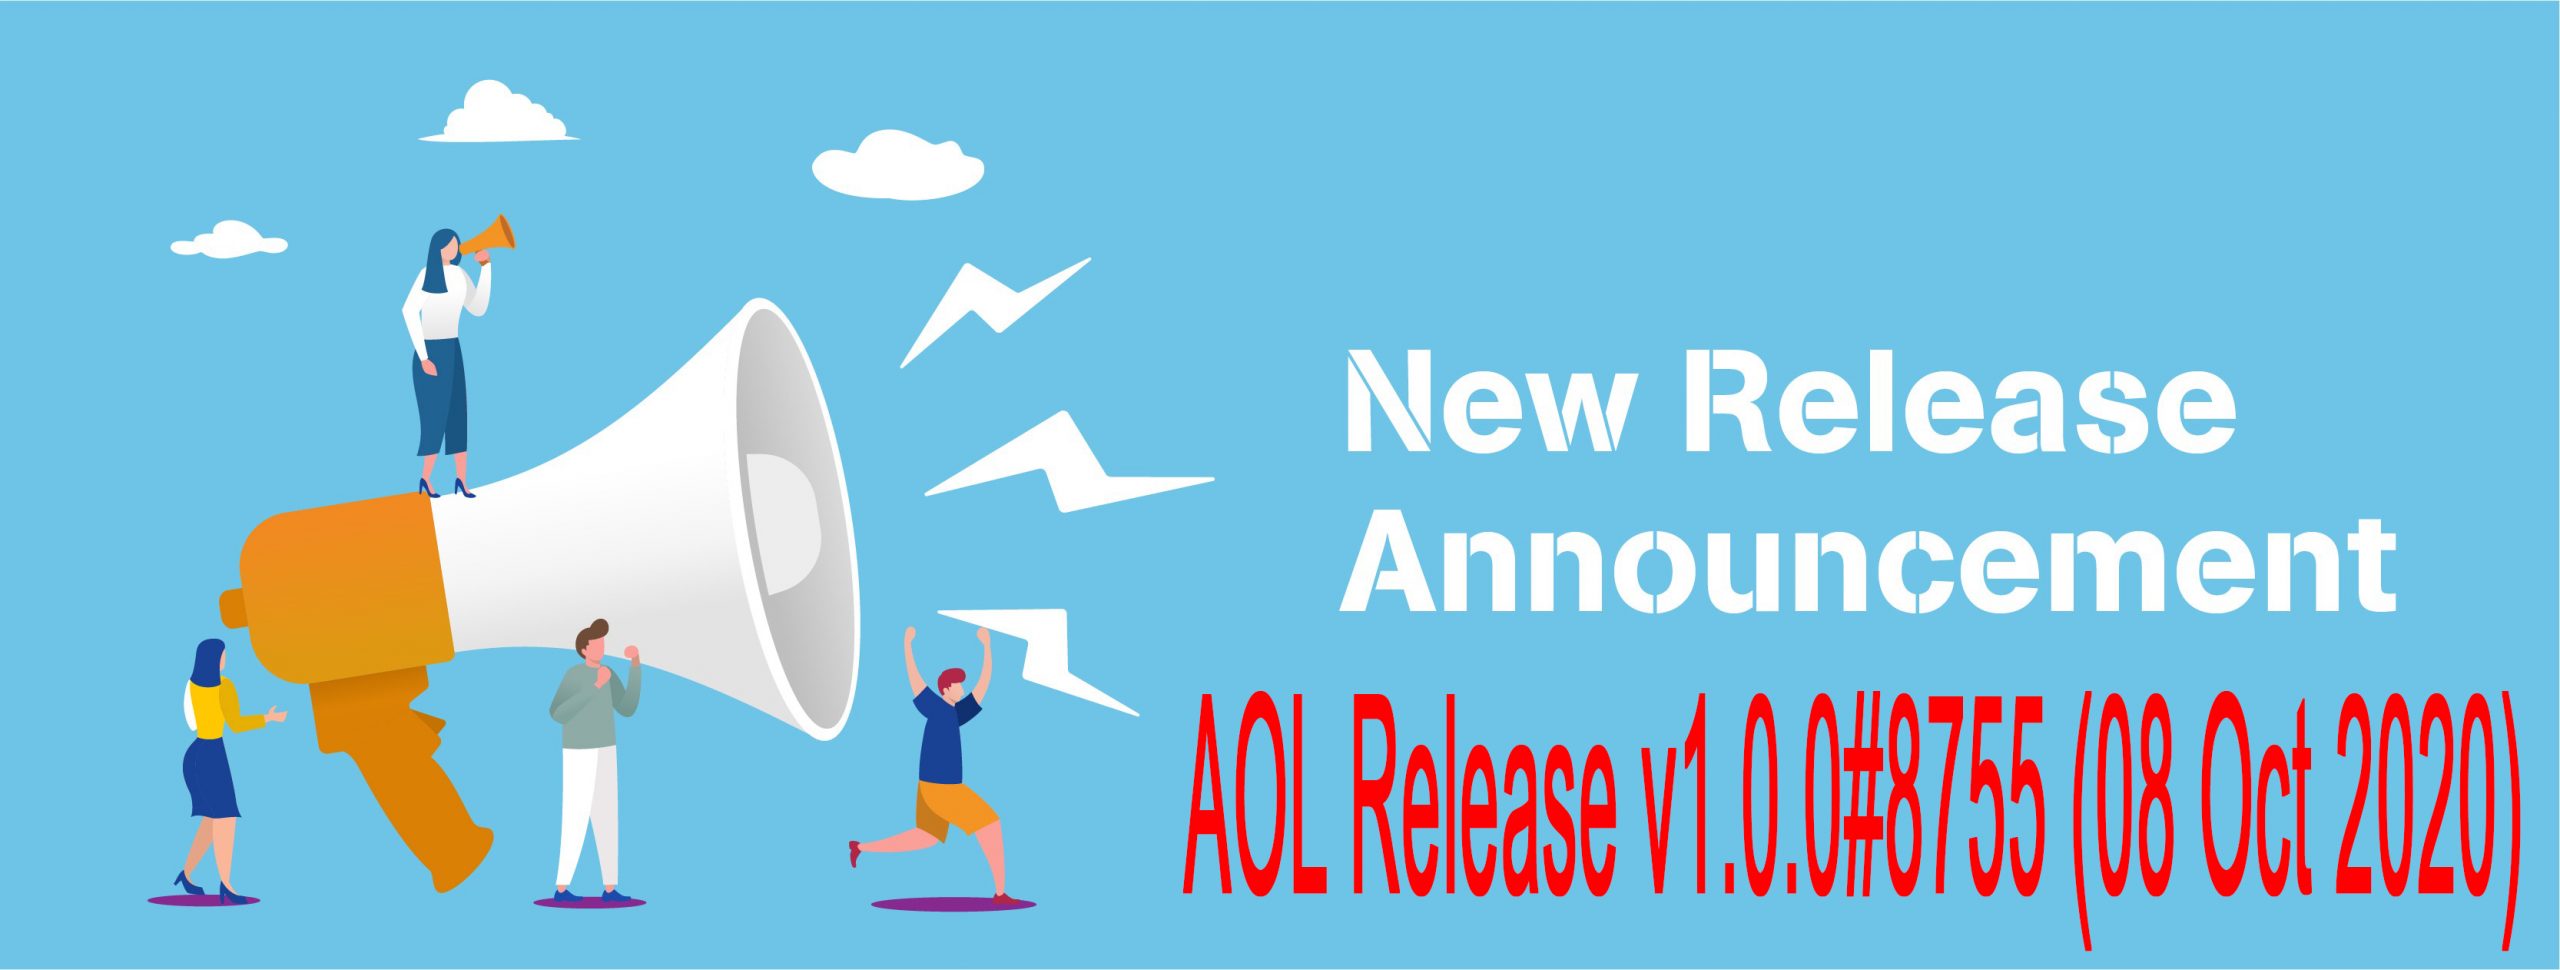 Accurate Online Release v1.0.0#8755 (08 Oct 2020)